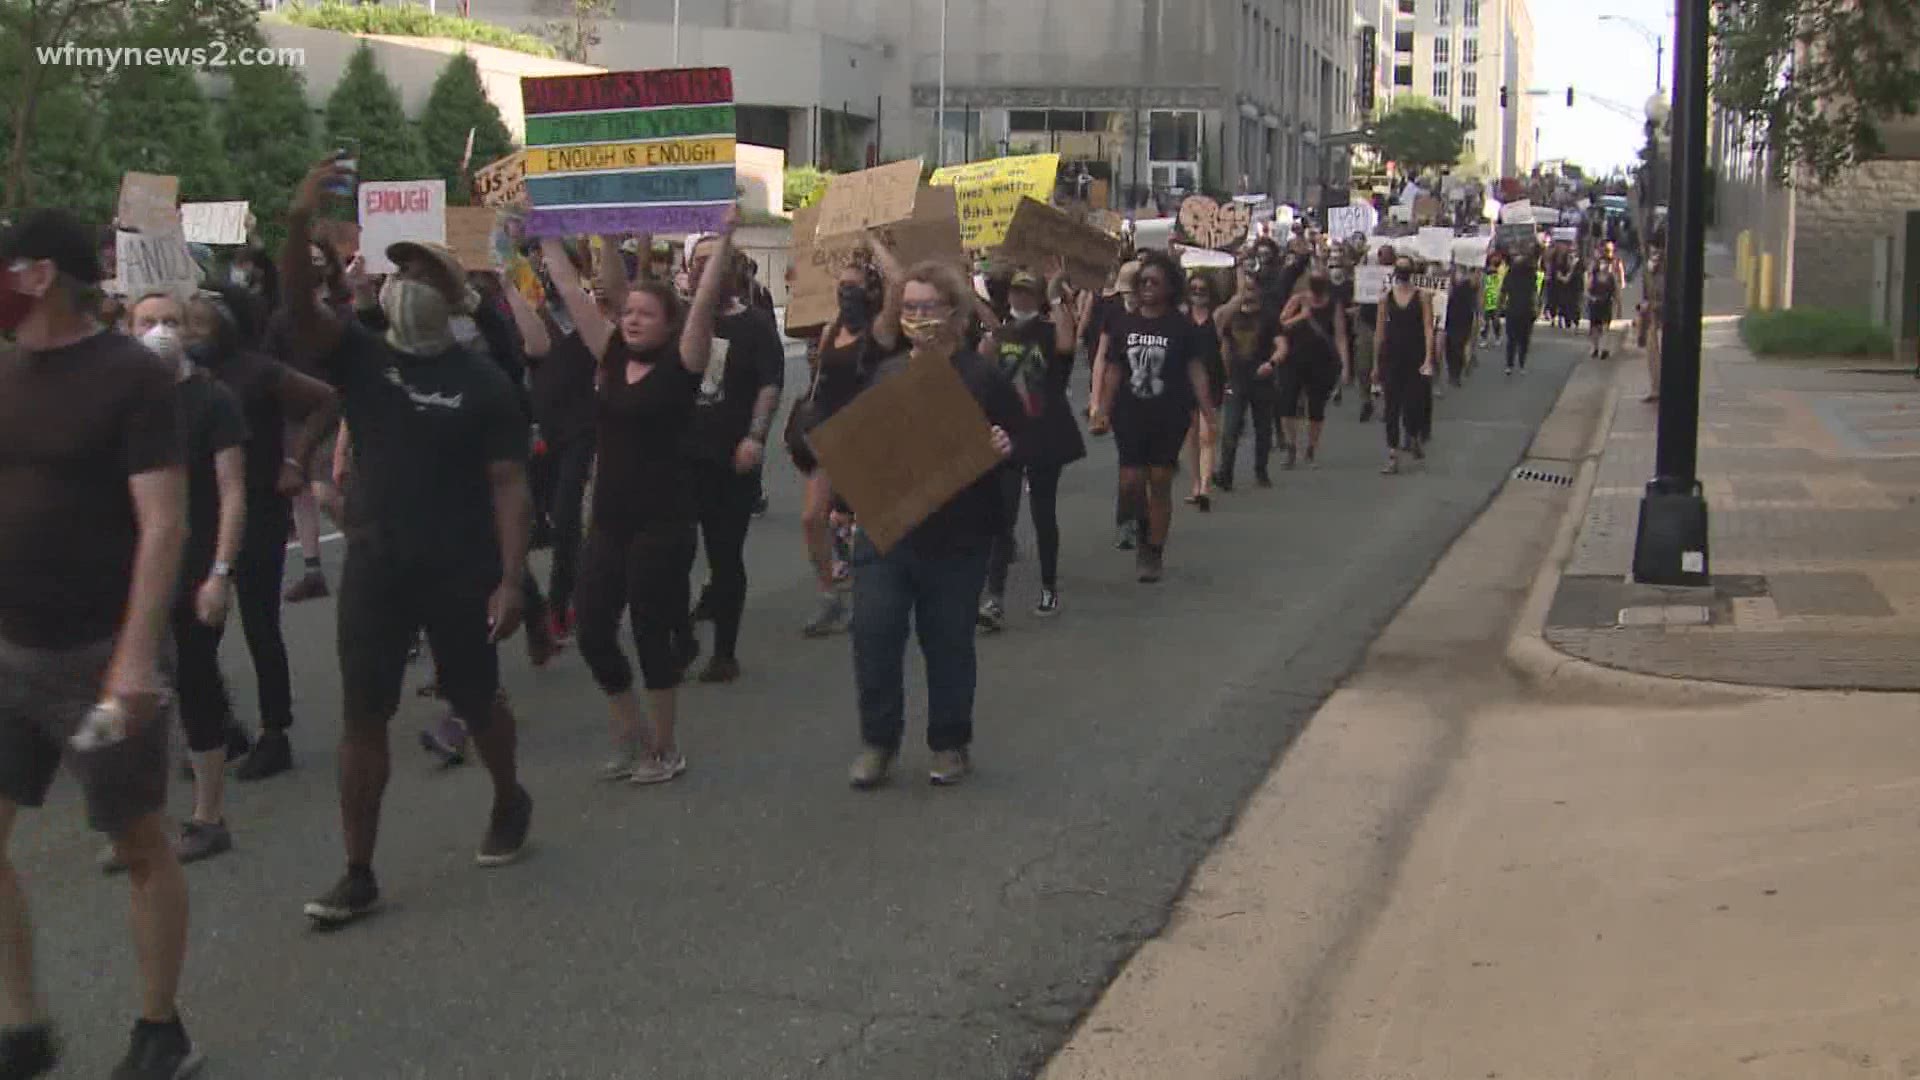 Protesters gathered in downtown Winston-Salem to peacefully spread their message.